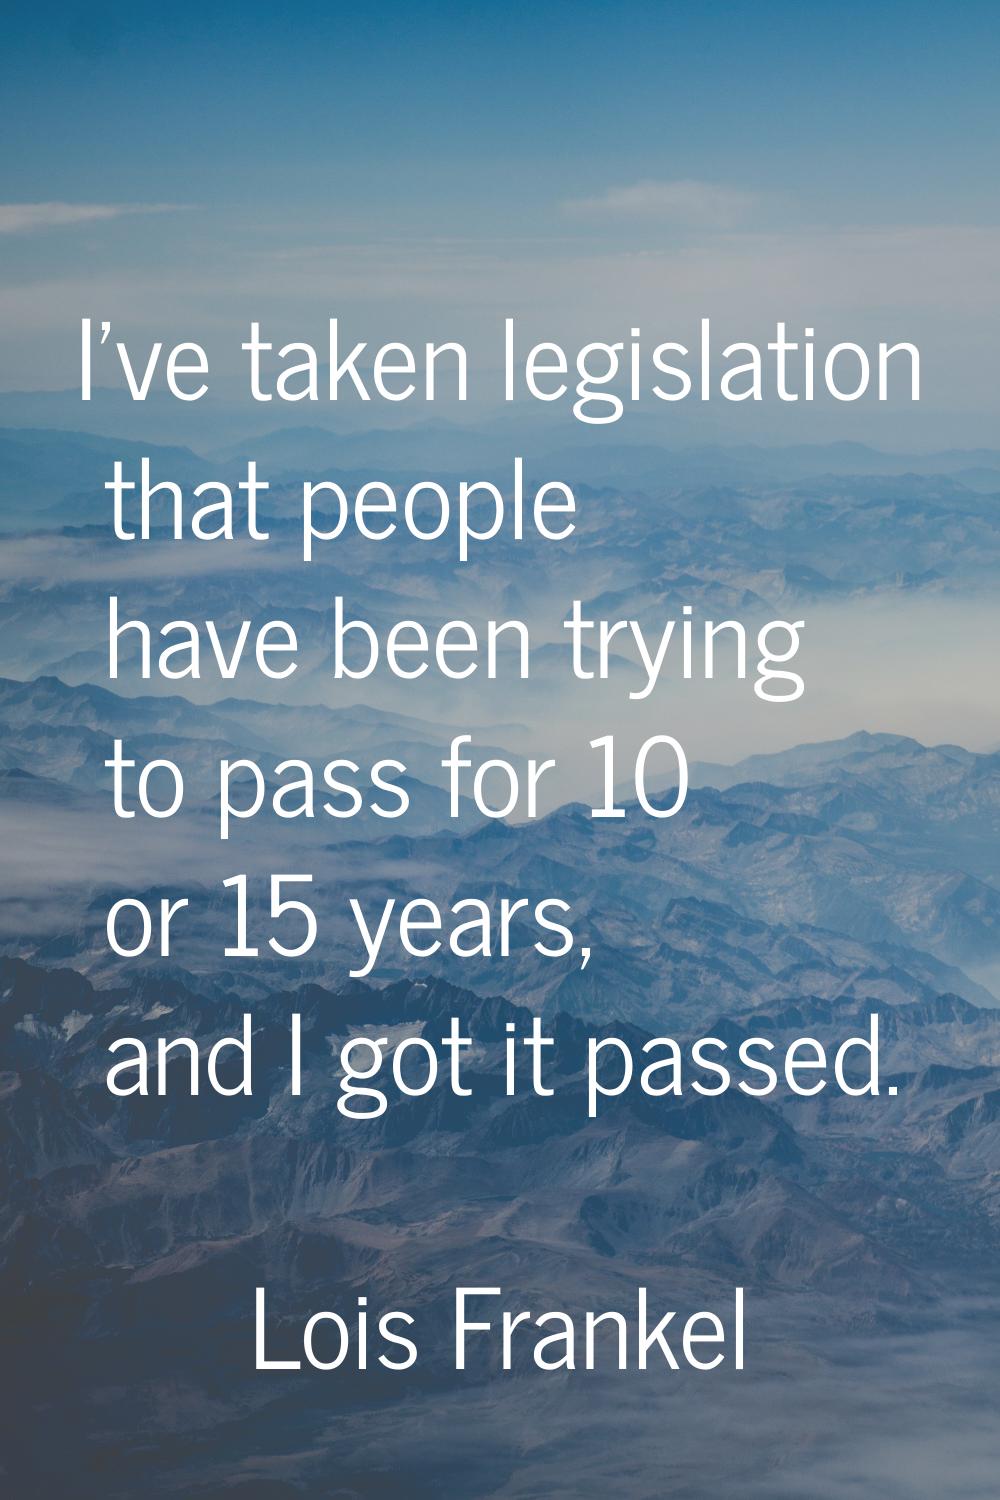 I've taken legislation that people have been trying to pass for 10 or 15 years, and I got it passed